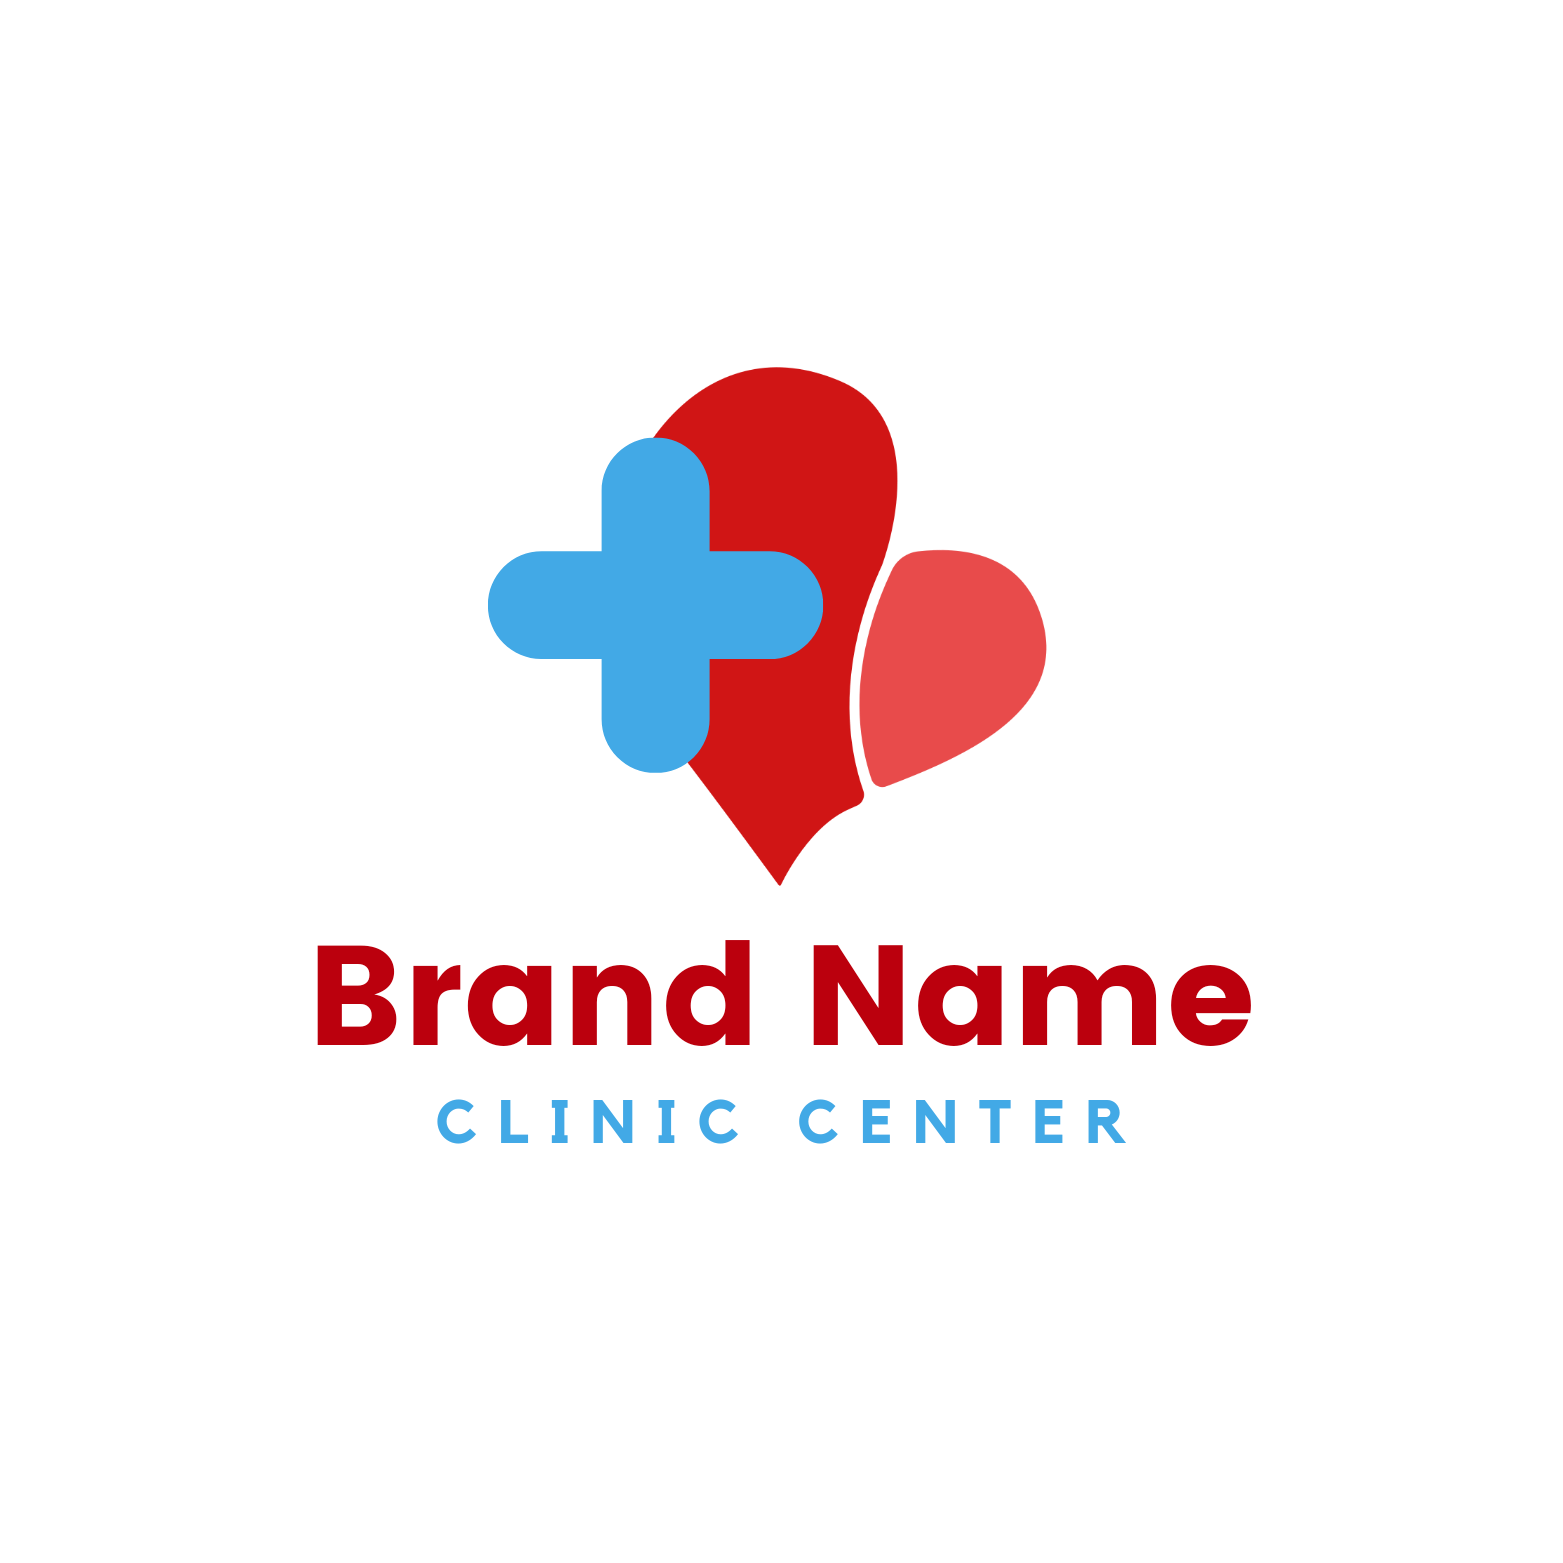 Medical logo is suitable for emergency